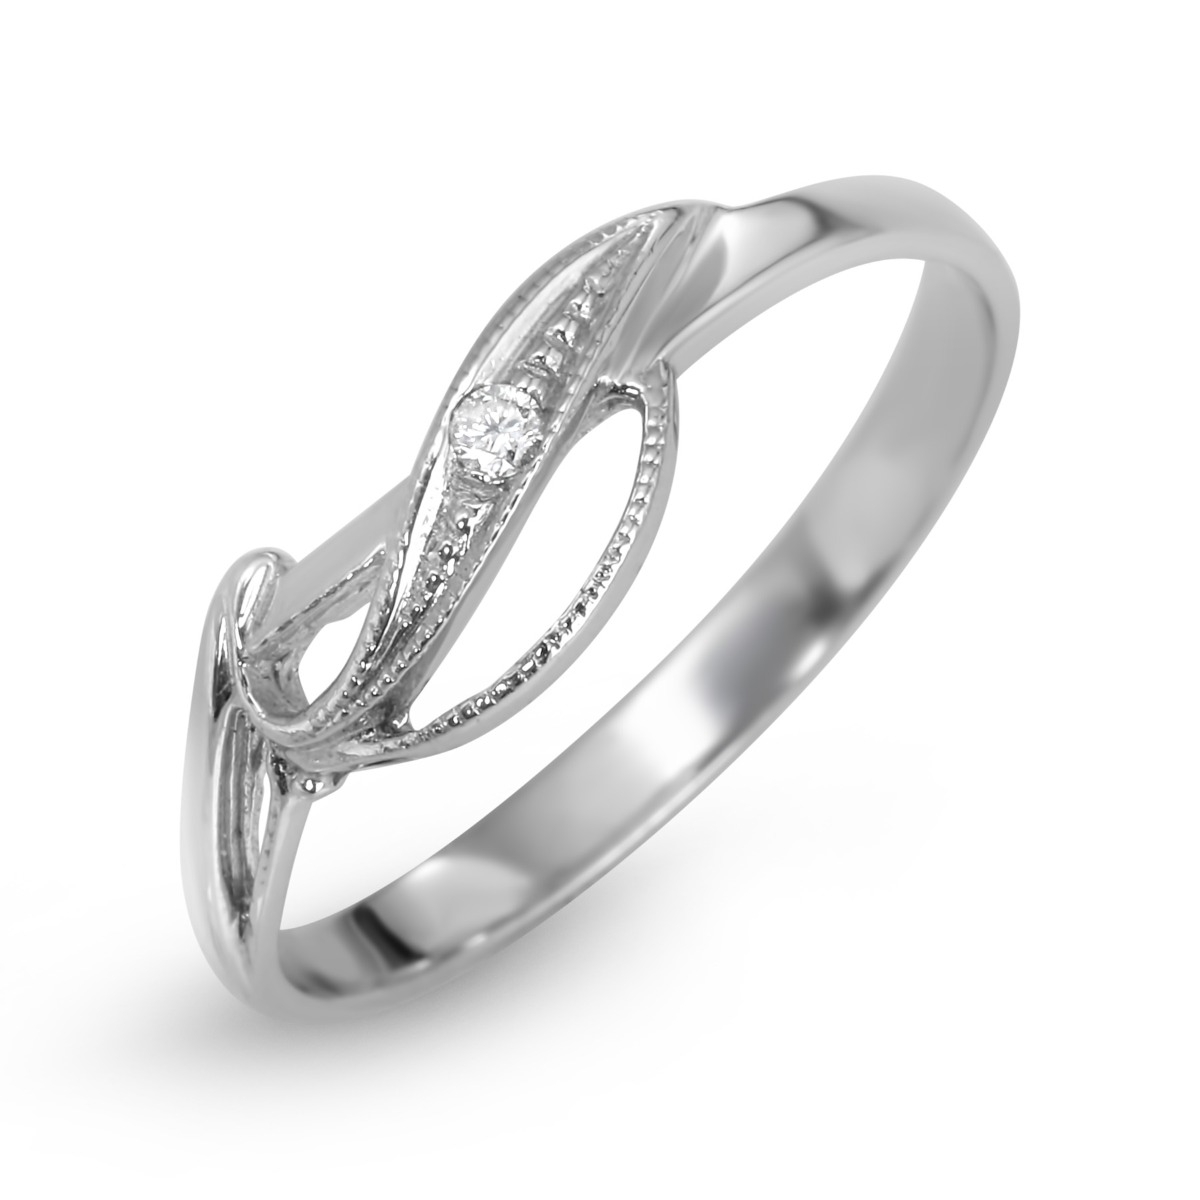 14K White Gold and Diamond Ring With Wavy Design - 1